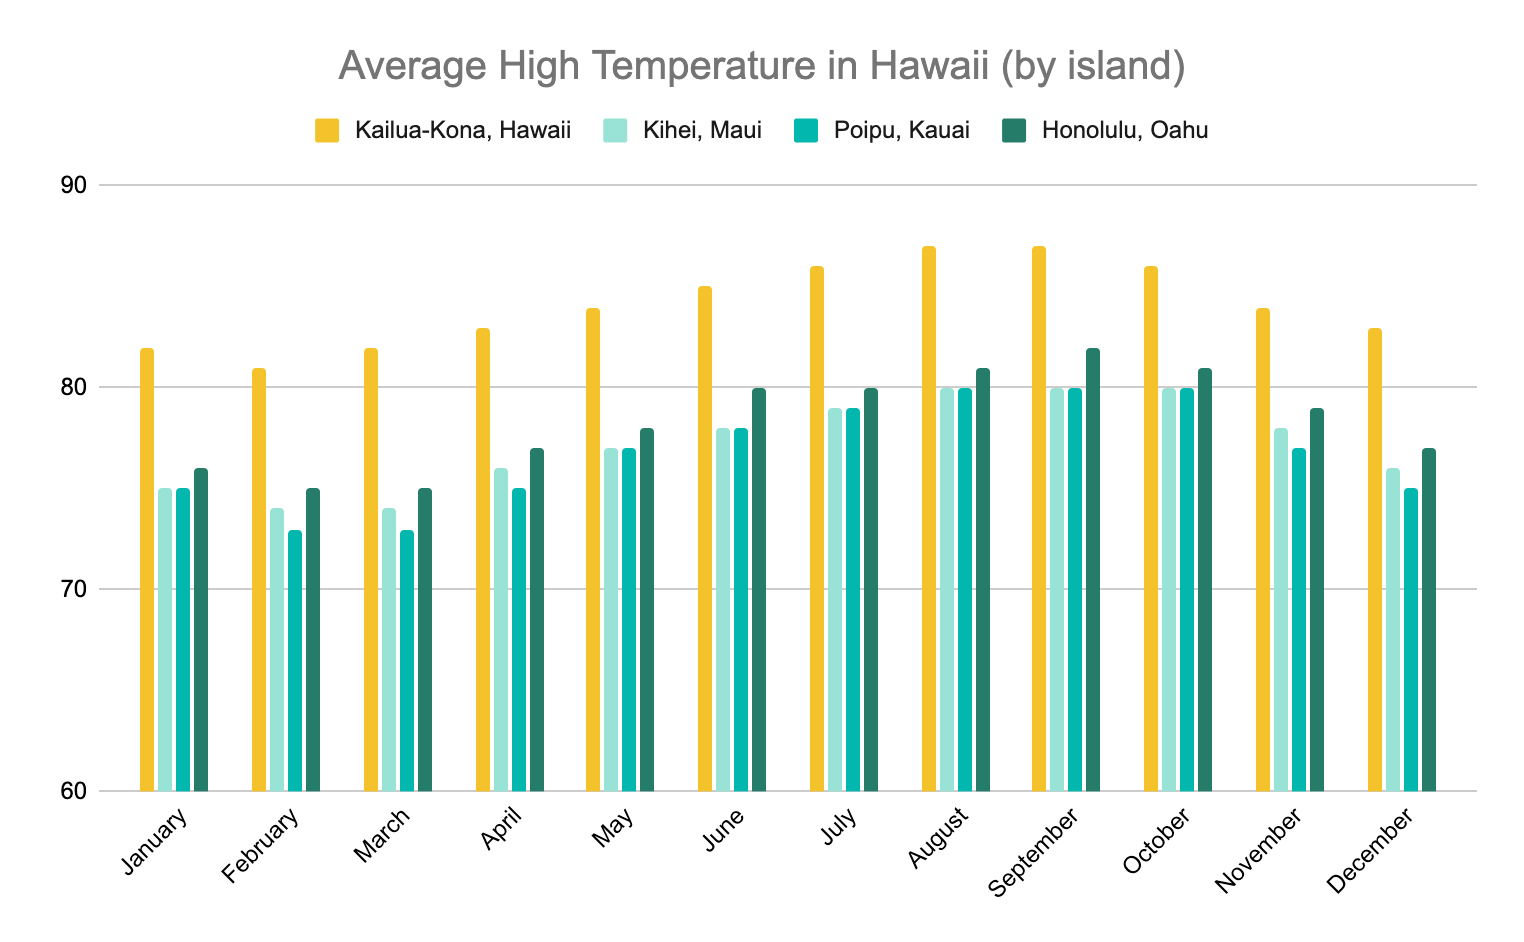 Graph depicting the average high temperatures (Fahrenheit) in Hawaii by island. The Big Island consistently has the highest temperatures, and the other islands tend to be comparable to one another.